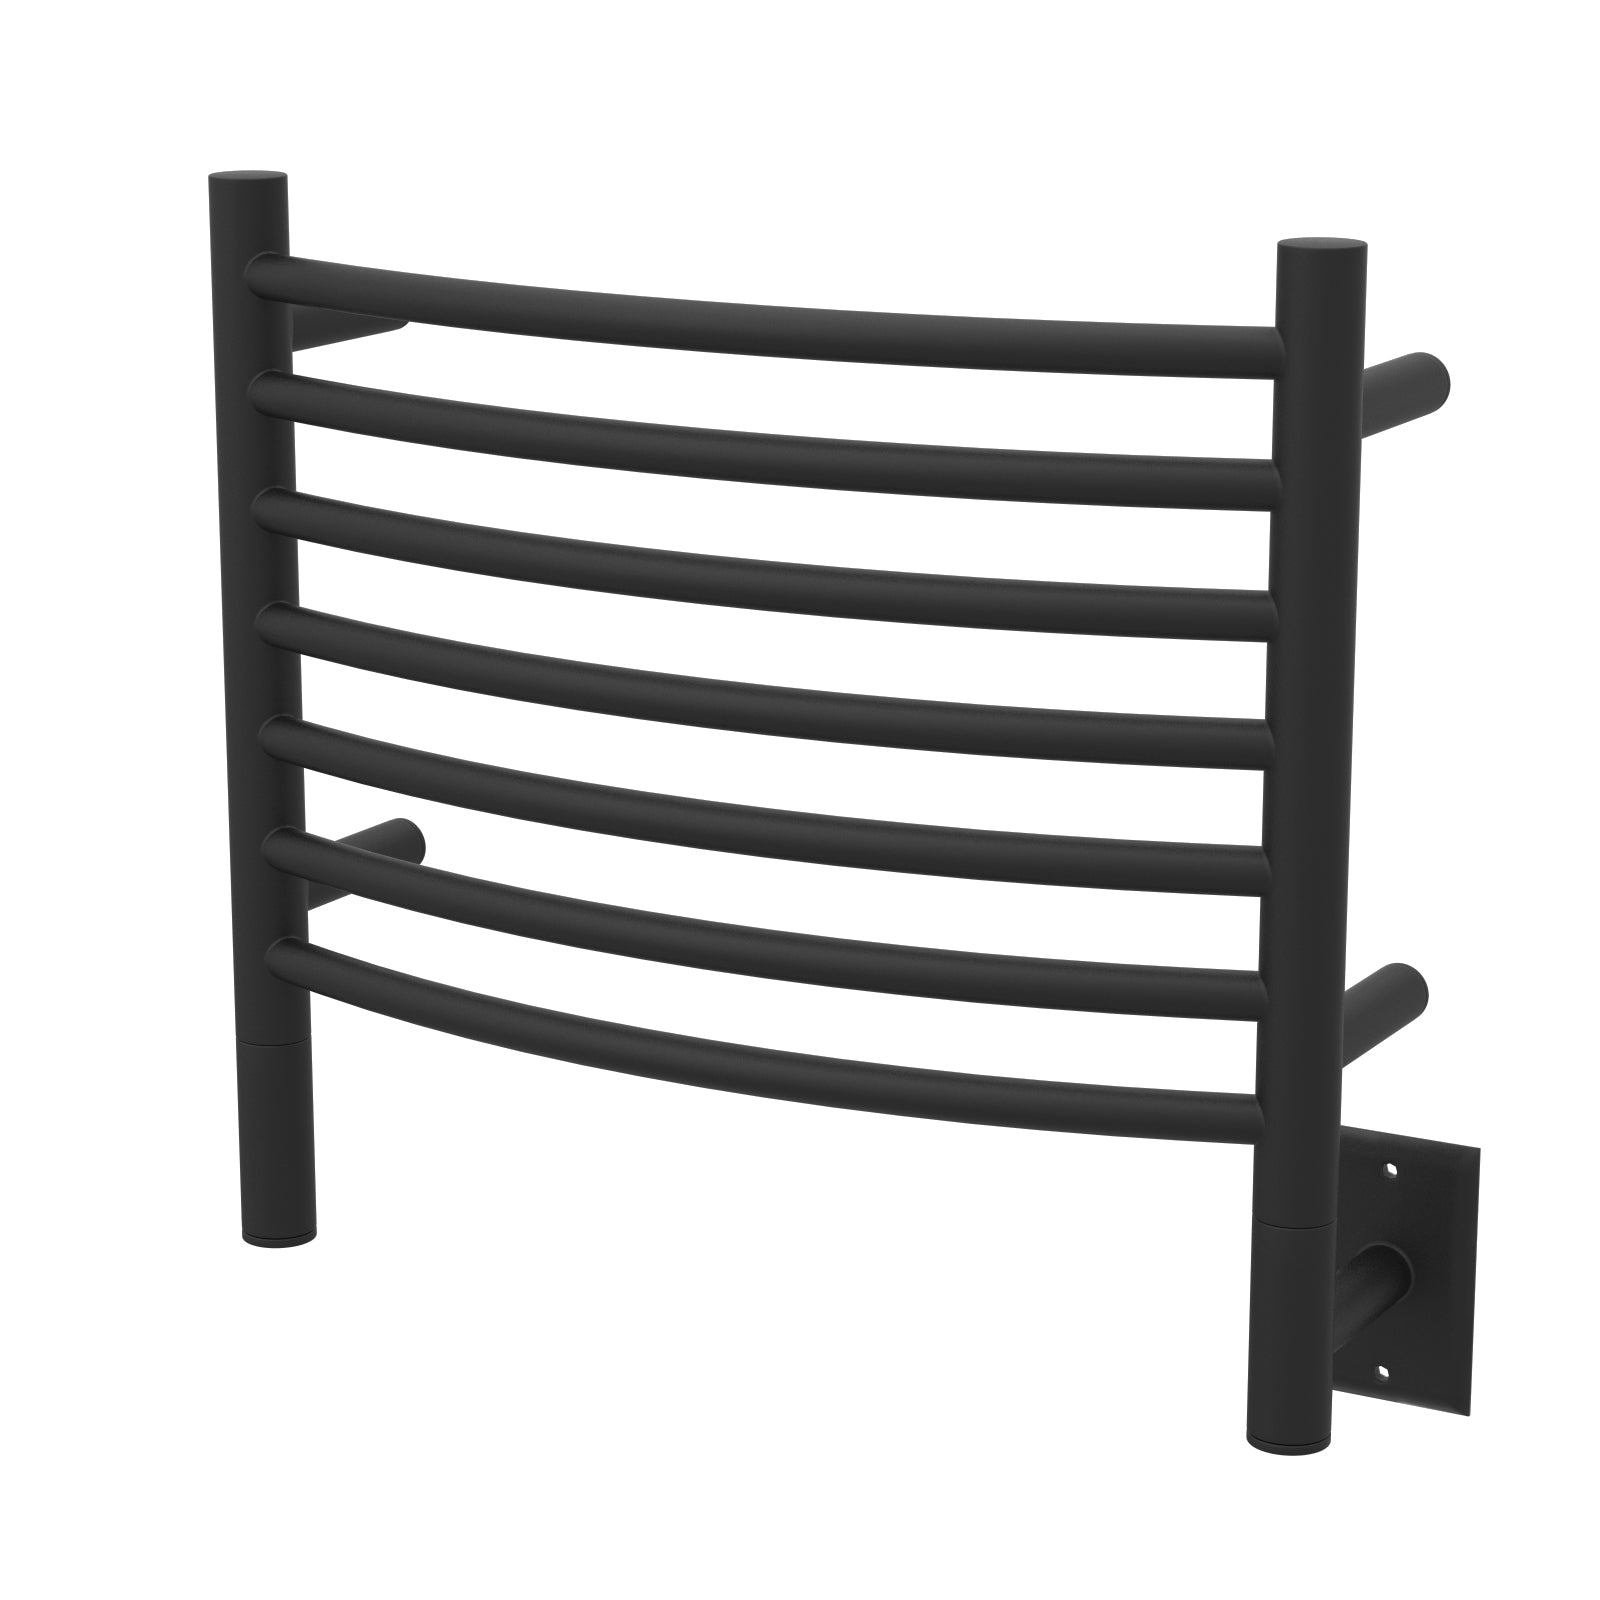 Oil Rubbed Bronze Towel Warmer, Amba Jeeves H Curved, Hardwired, 7 Bars, W 21" H 18"